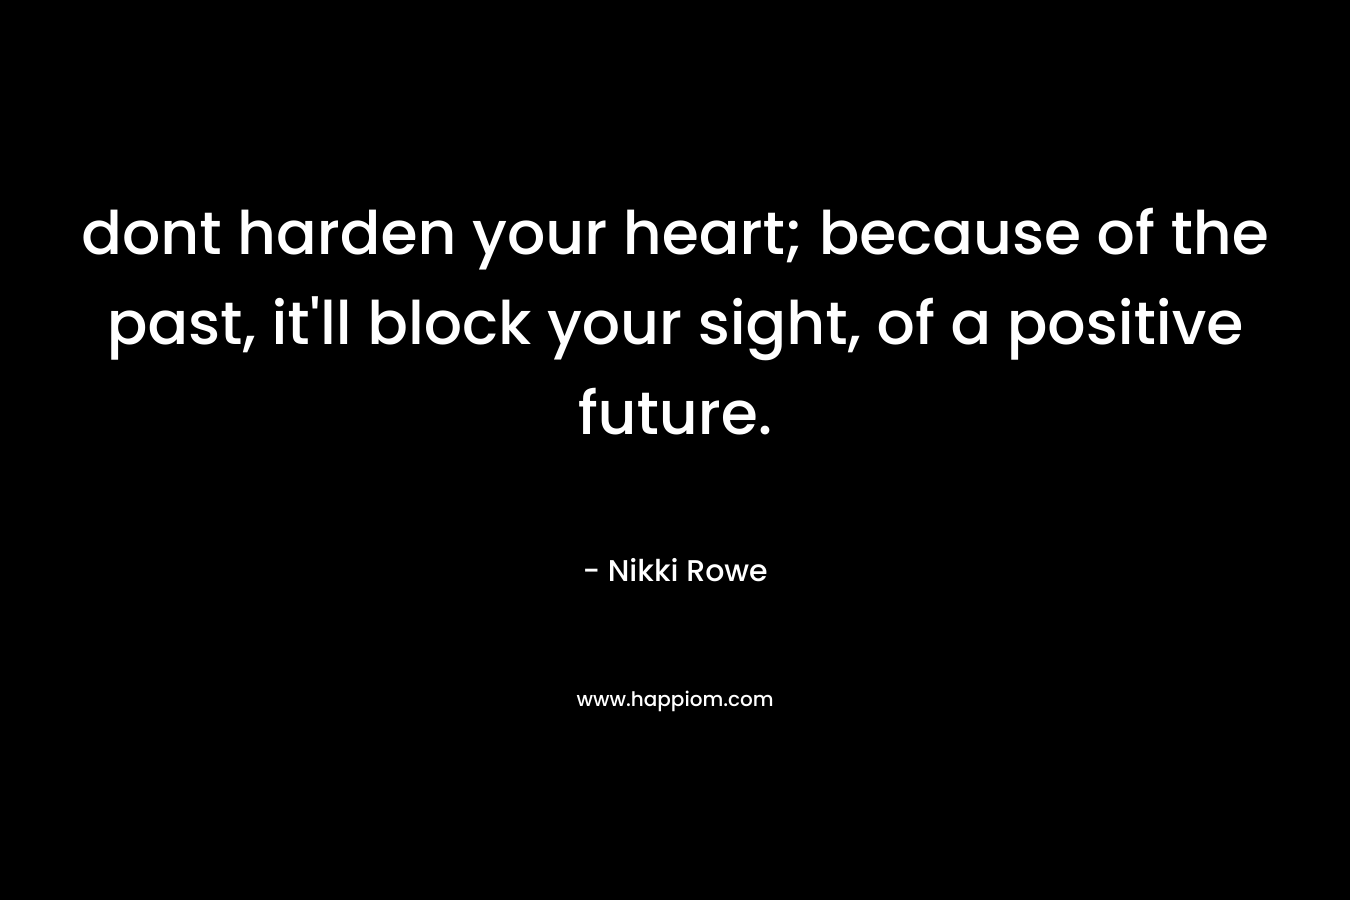 dont harden your heart; because of the past, it’ll block your sight, of a positive future. – Nikki Rowe